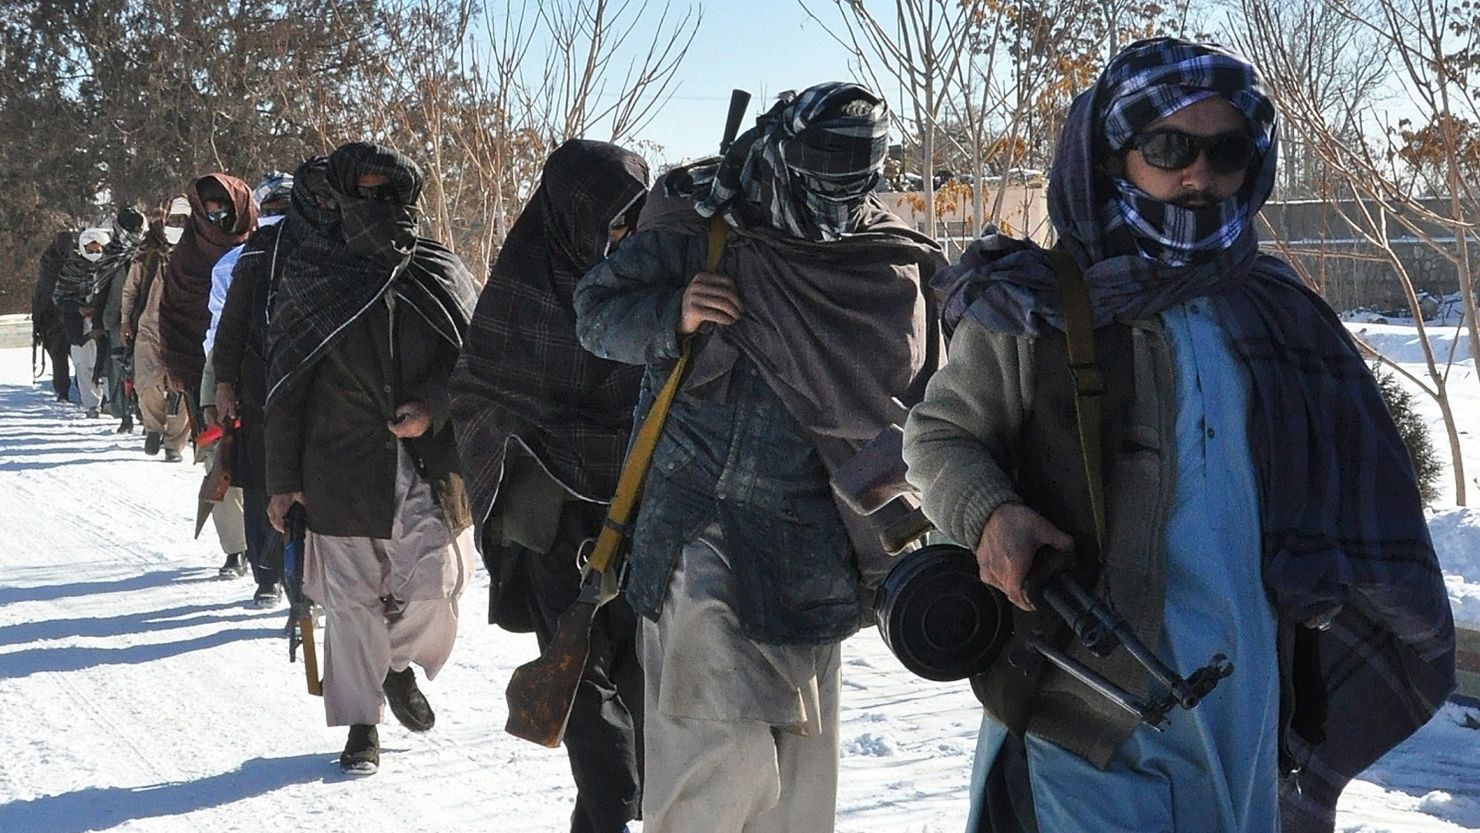 Taliban fighters pictured after joining Afghan government forces for a ceremony in Ghazni province on January 16.